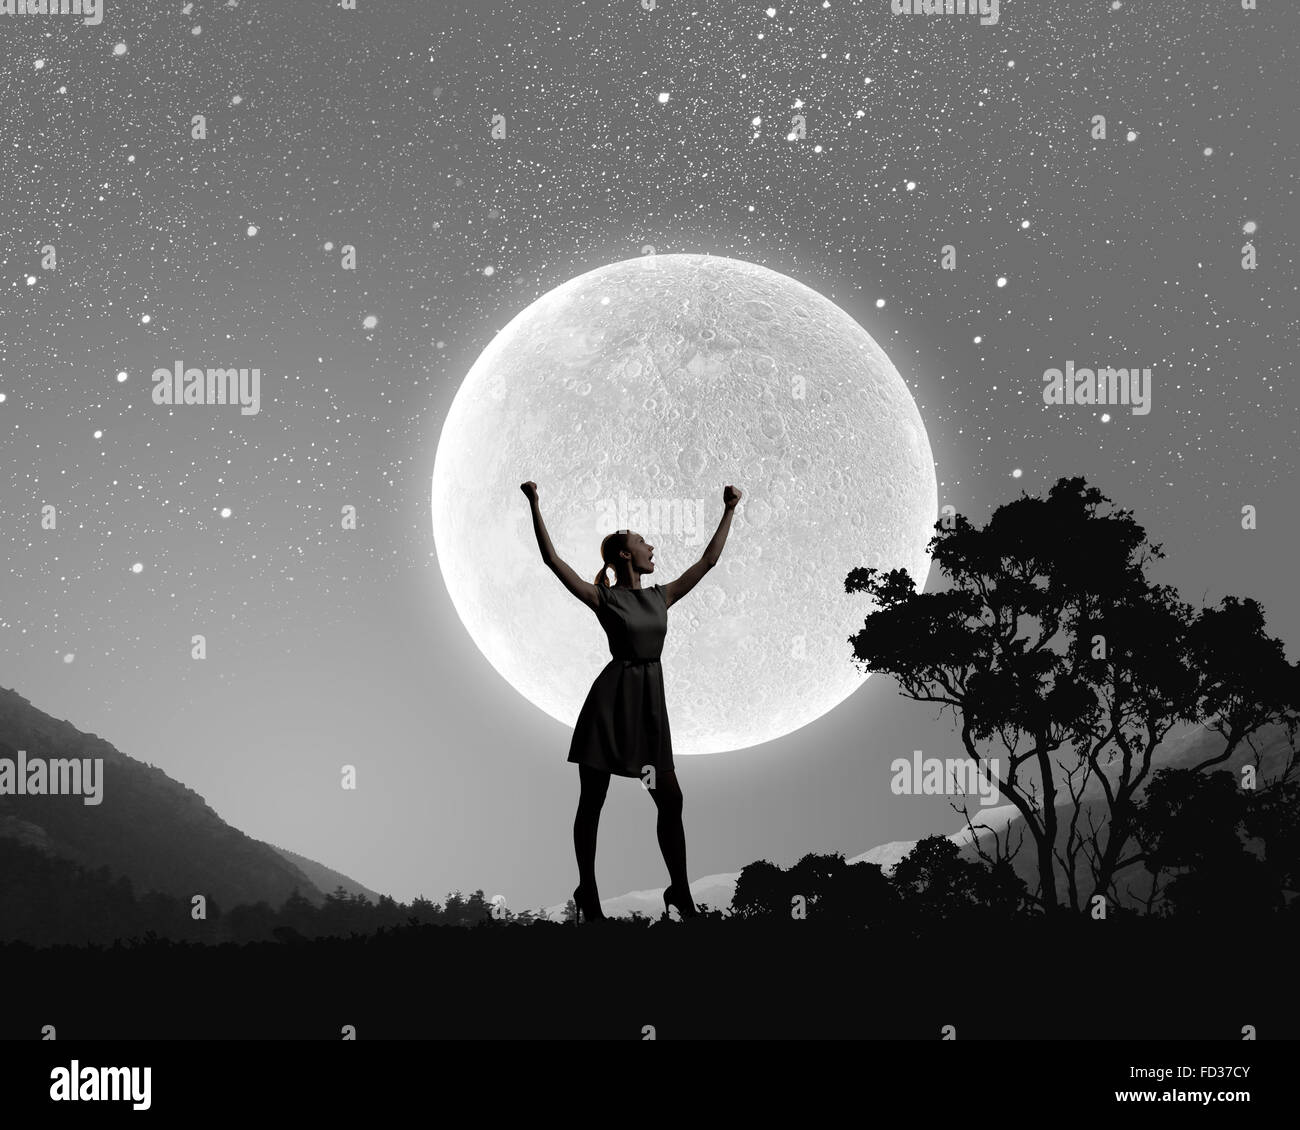 Women Silhouette Against Full Moon PNG Images